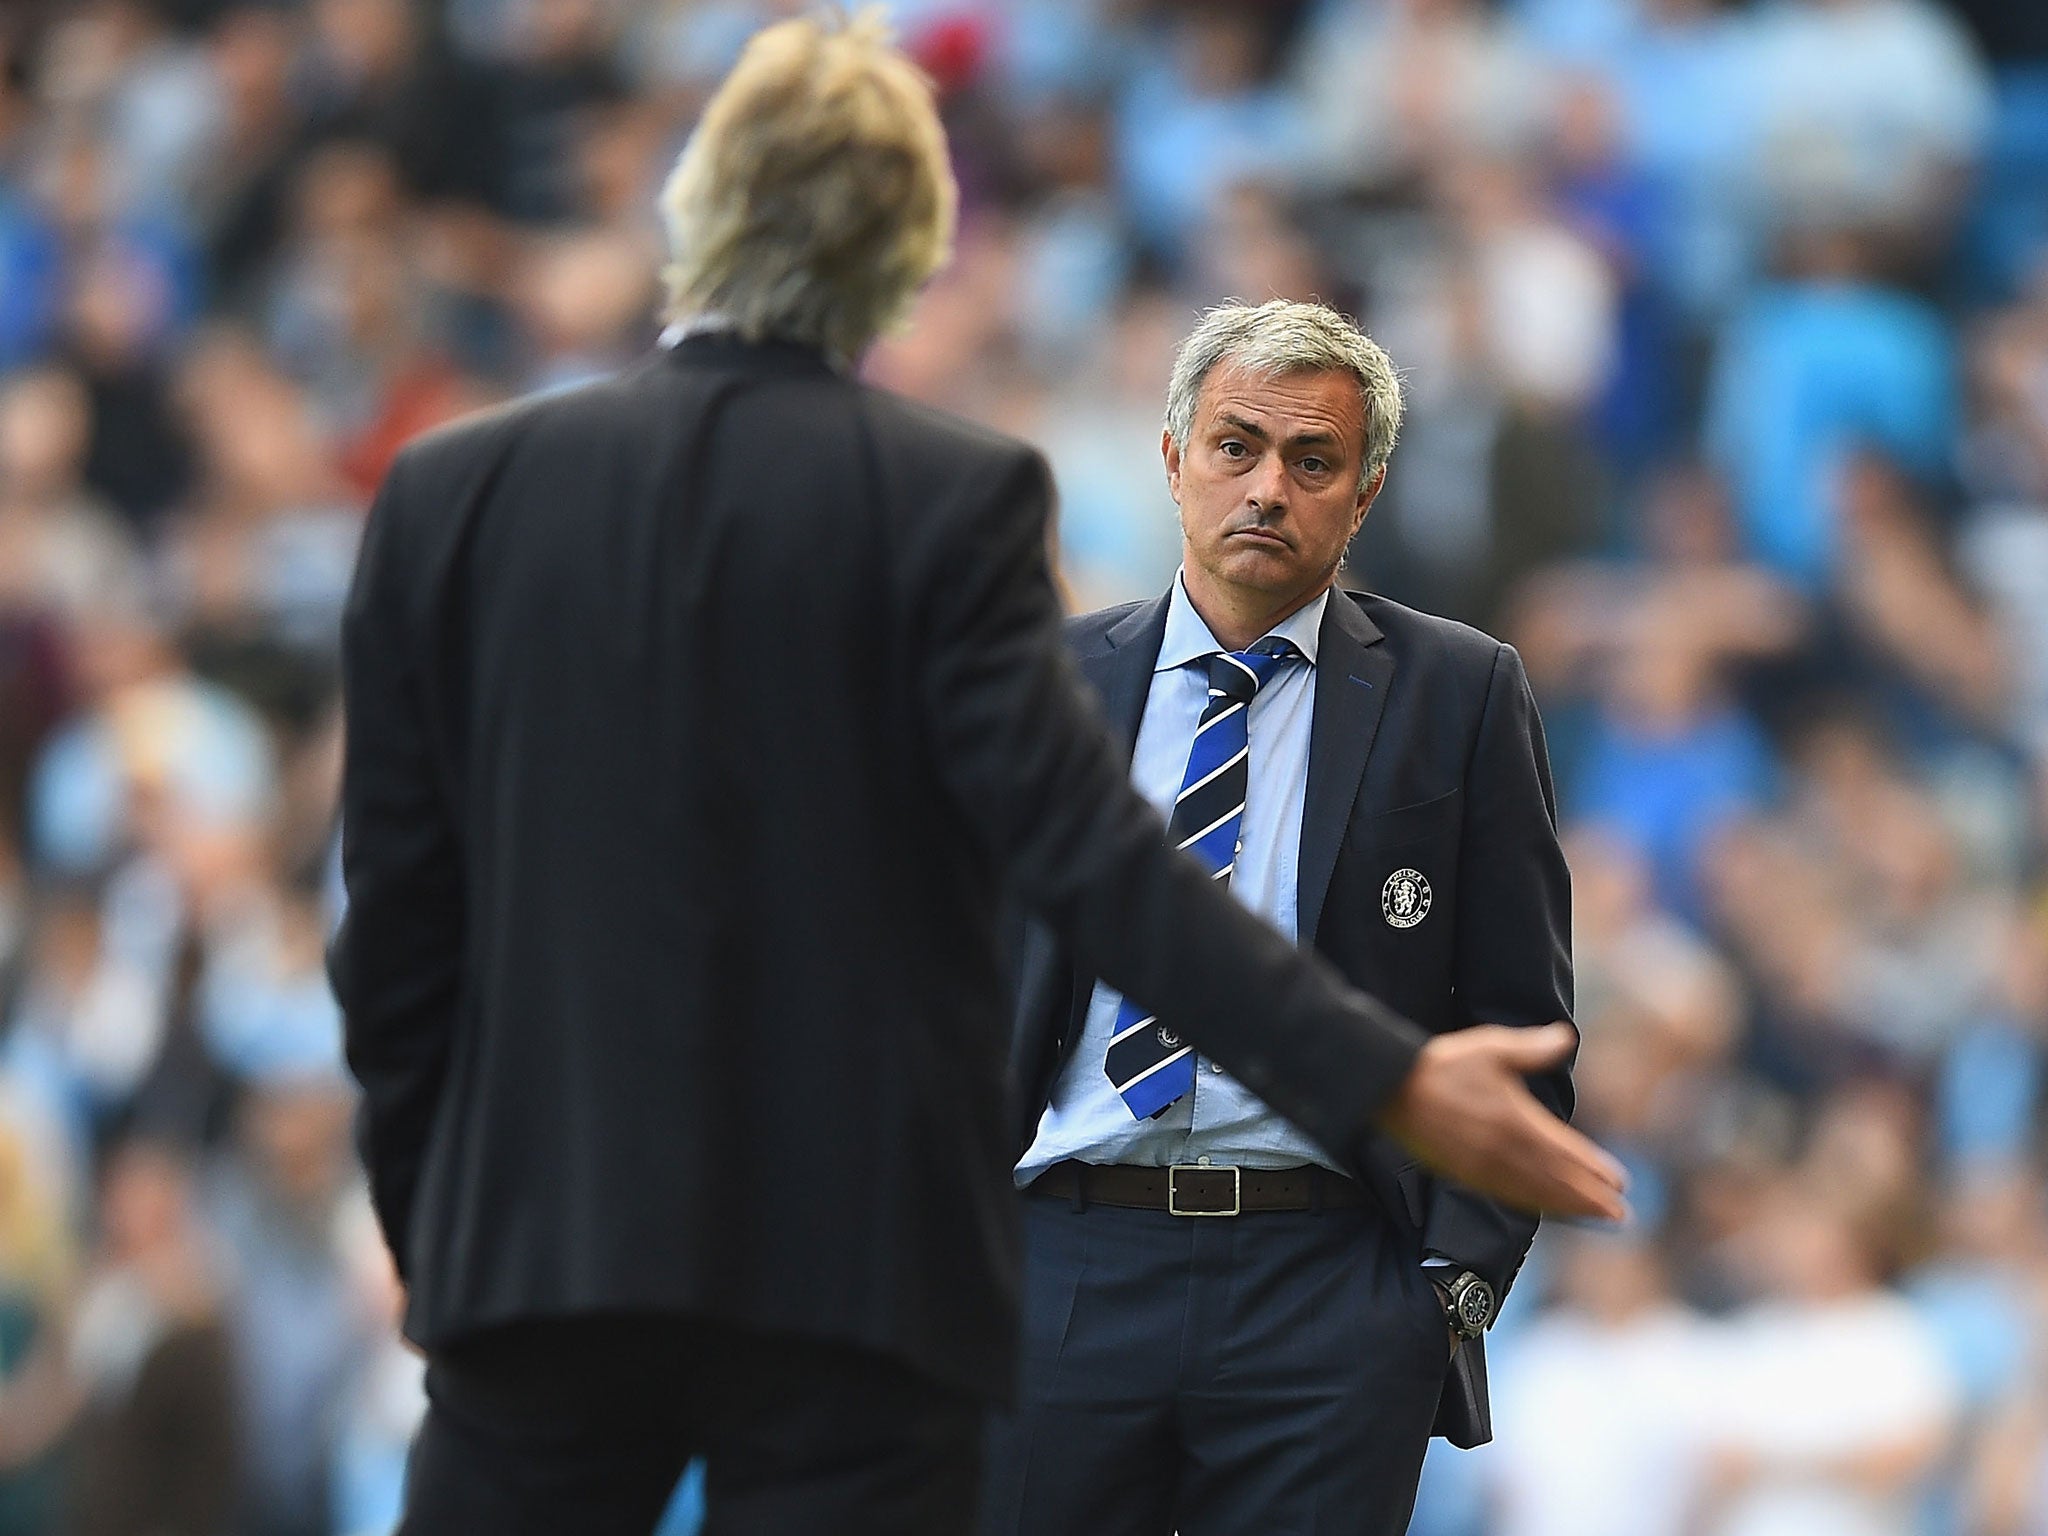 Manuel Pellegrini and Jose Mourinho converse on the touchline during the 1-1 draw